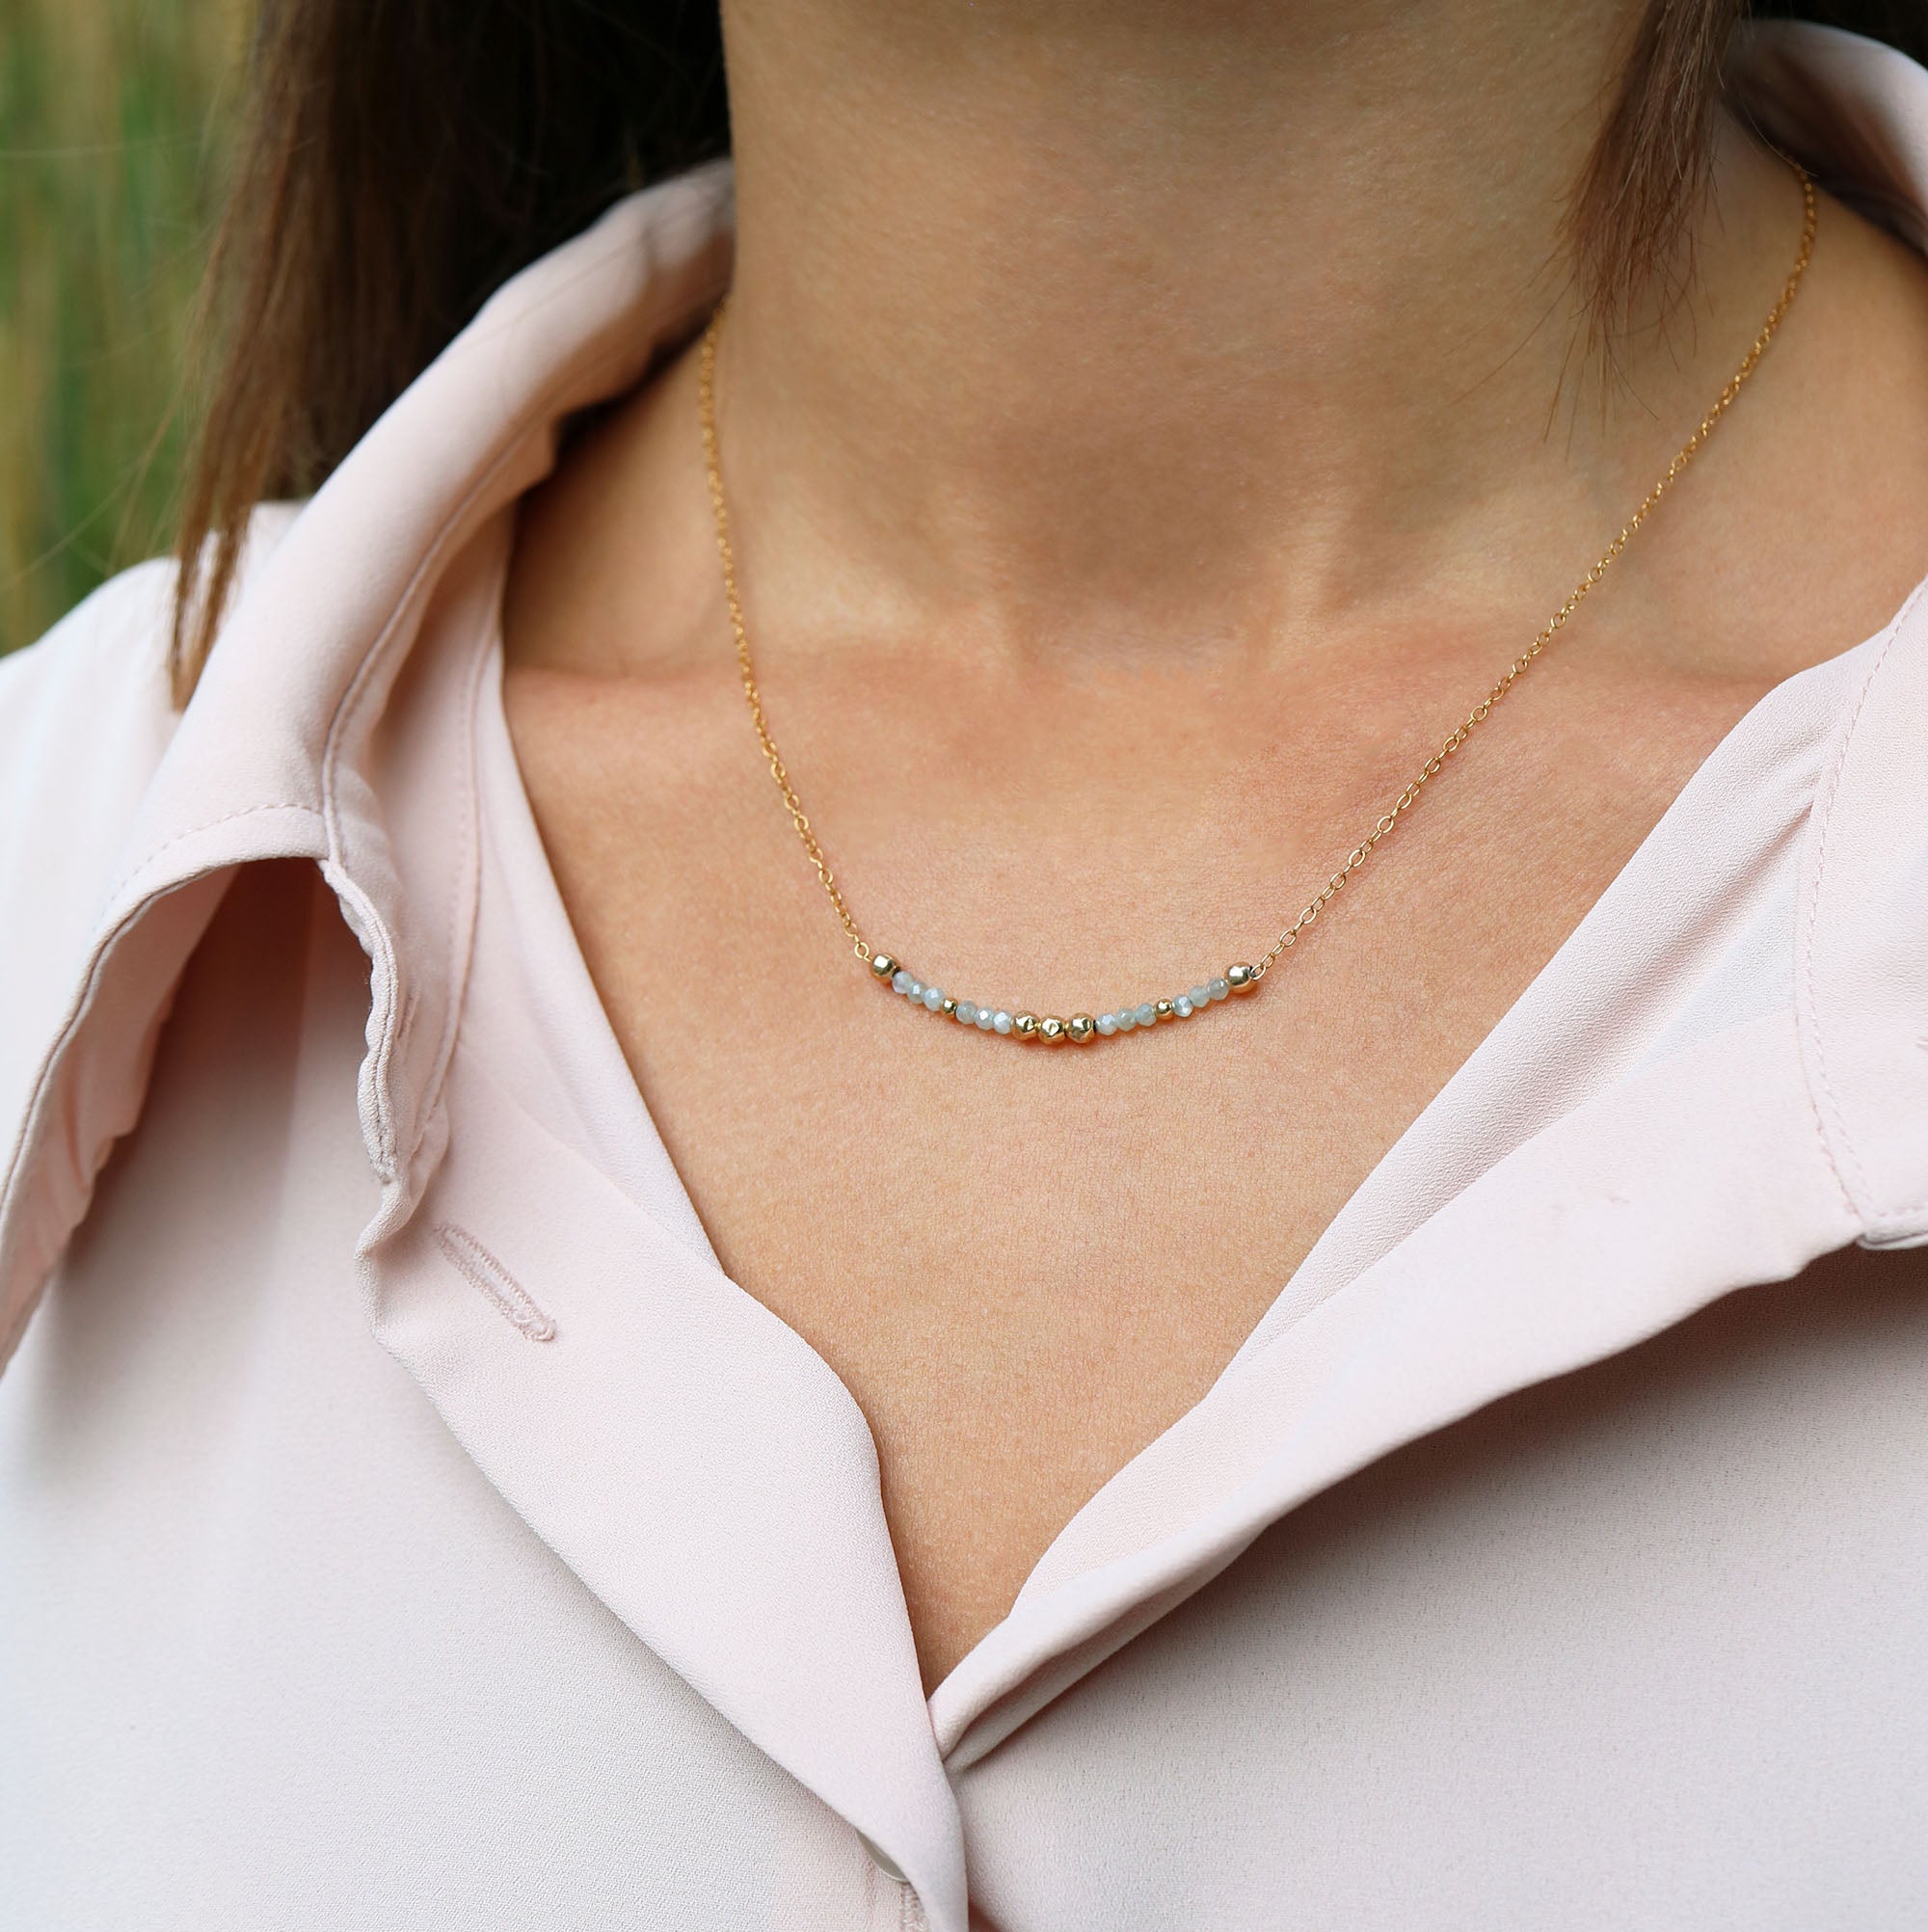 Light Goddess Necklace | Blue Moonstone and Gold